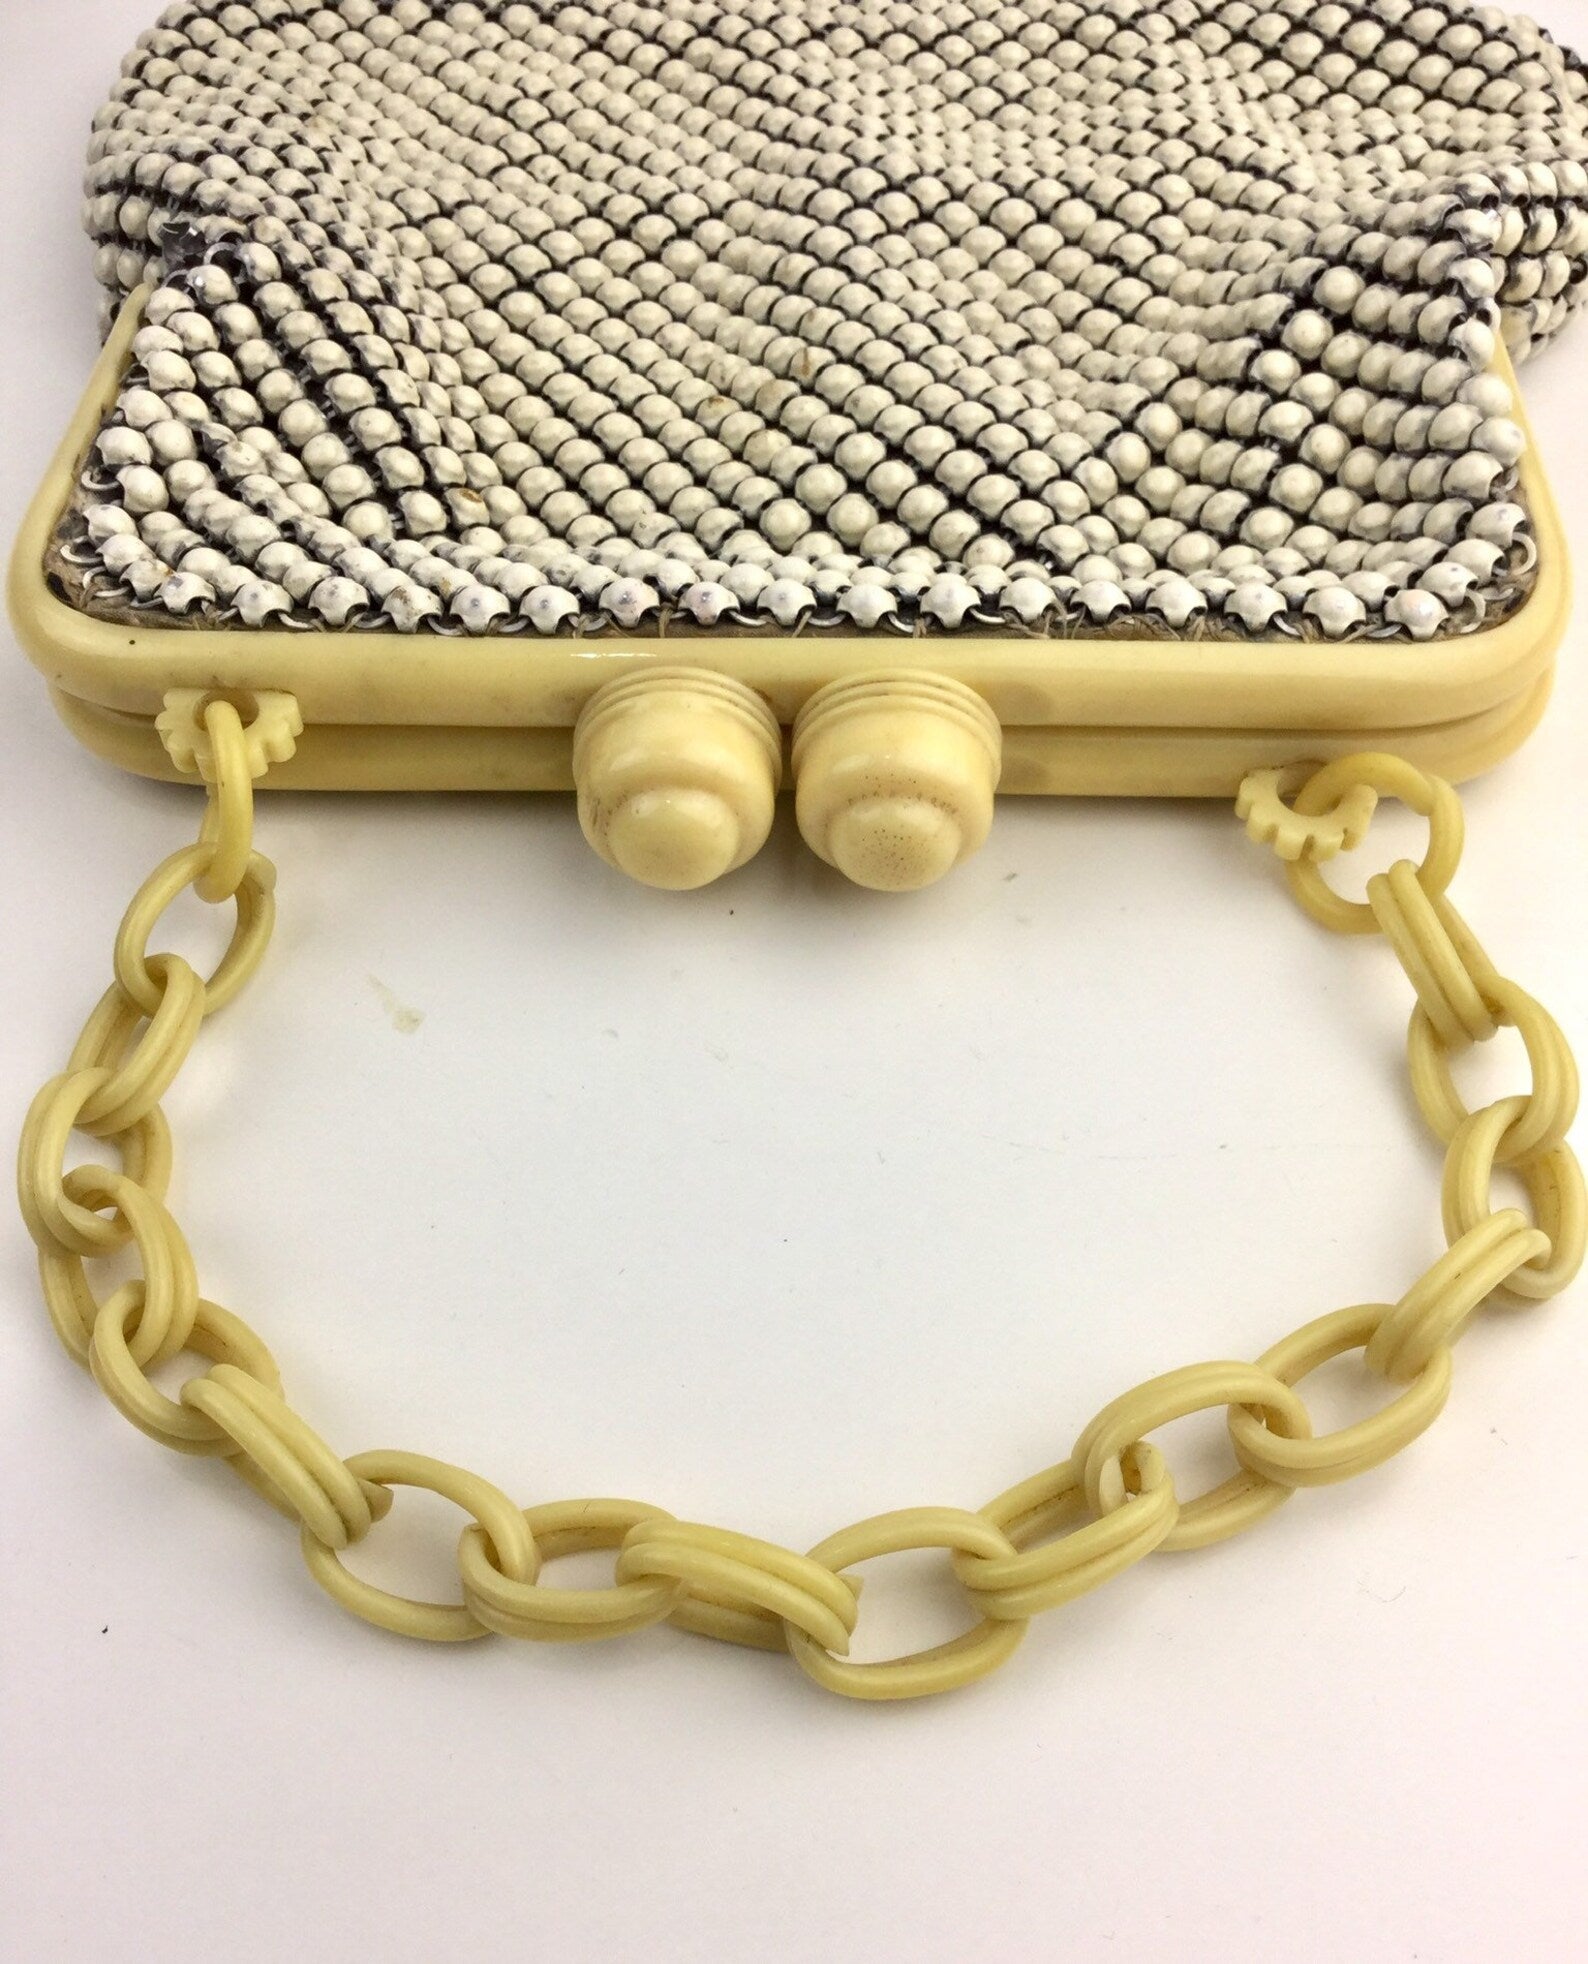 Whiting and Davis Handbag Ivory Alumesh and Celluloid Frame and